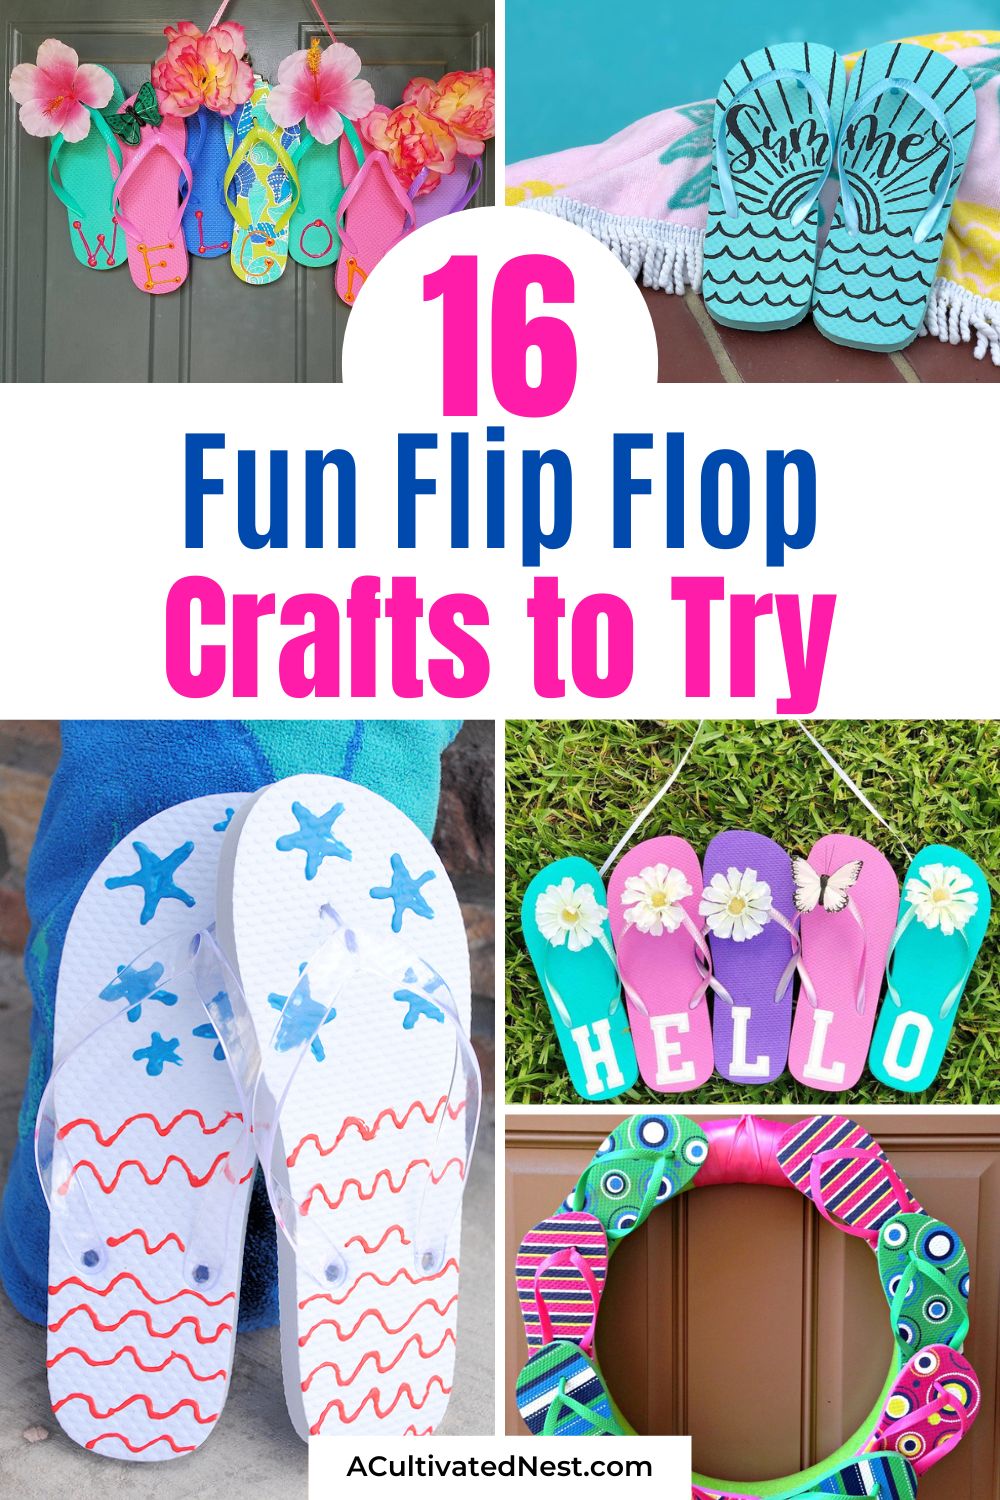 16 Fun Flip Flop Crafts- Dive into summer crafting with these awesome flip flop craft projects! Perfect for all ages, you can create beautiful wreaths, unique footwear, and more. Personalize your flip flops and get creative with these easy and fun DIY ideas! | #SummerCrafts #DIYFlipFlops #CreativeCrafts #summerDIY #ACultivatedNest